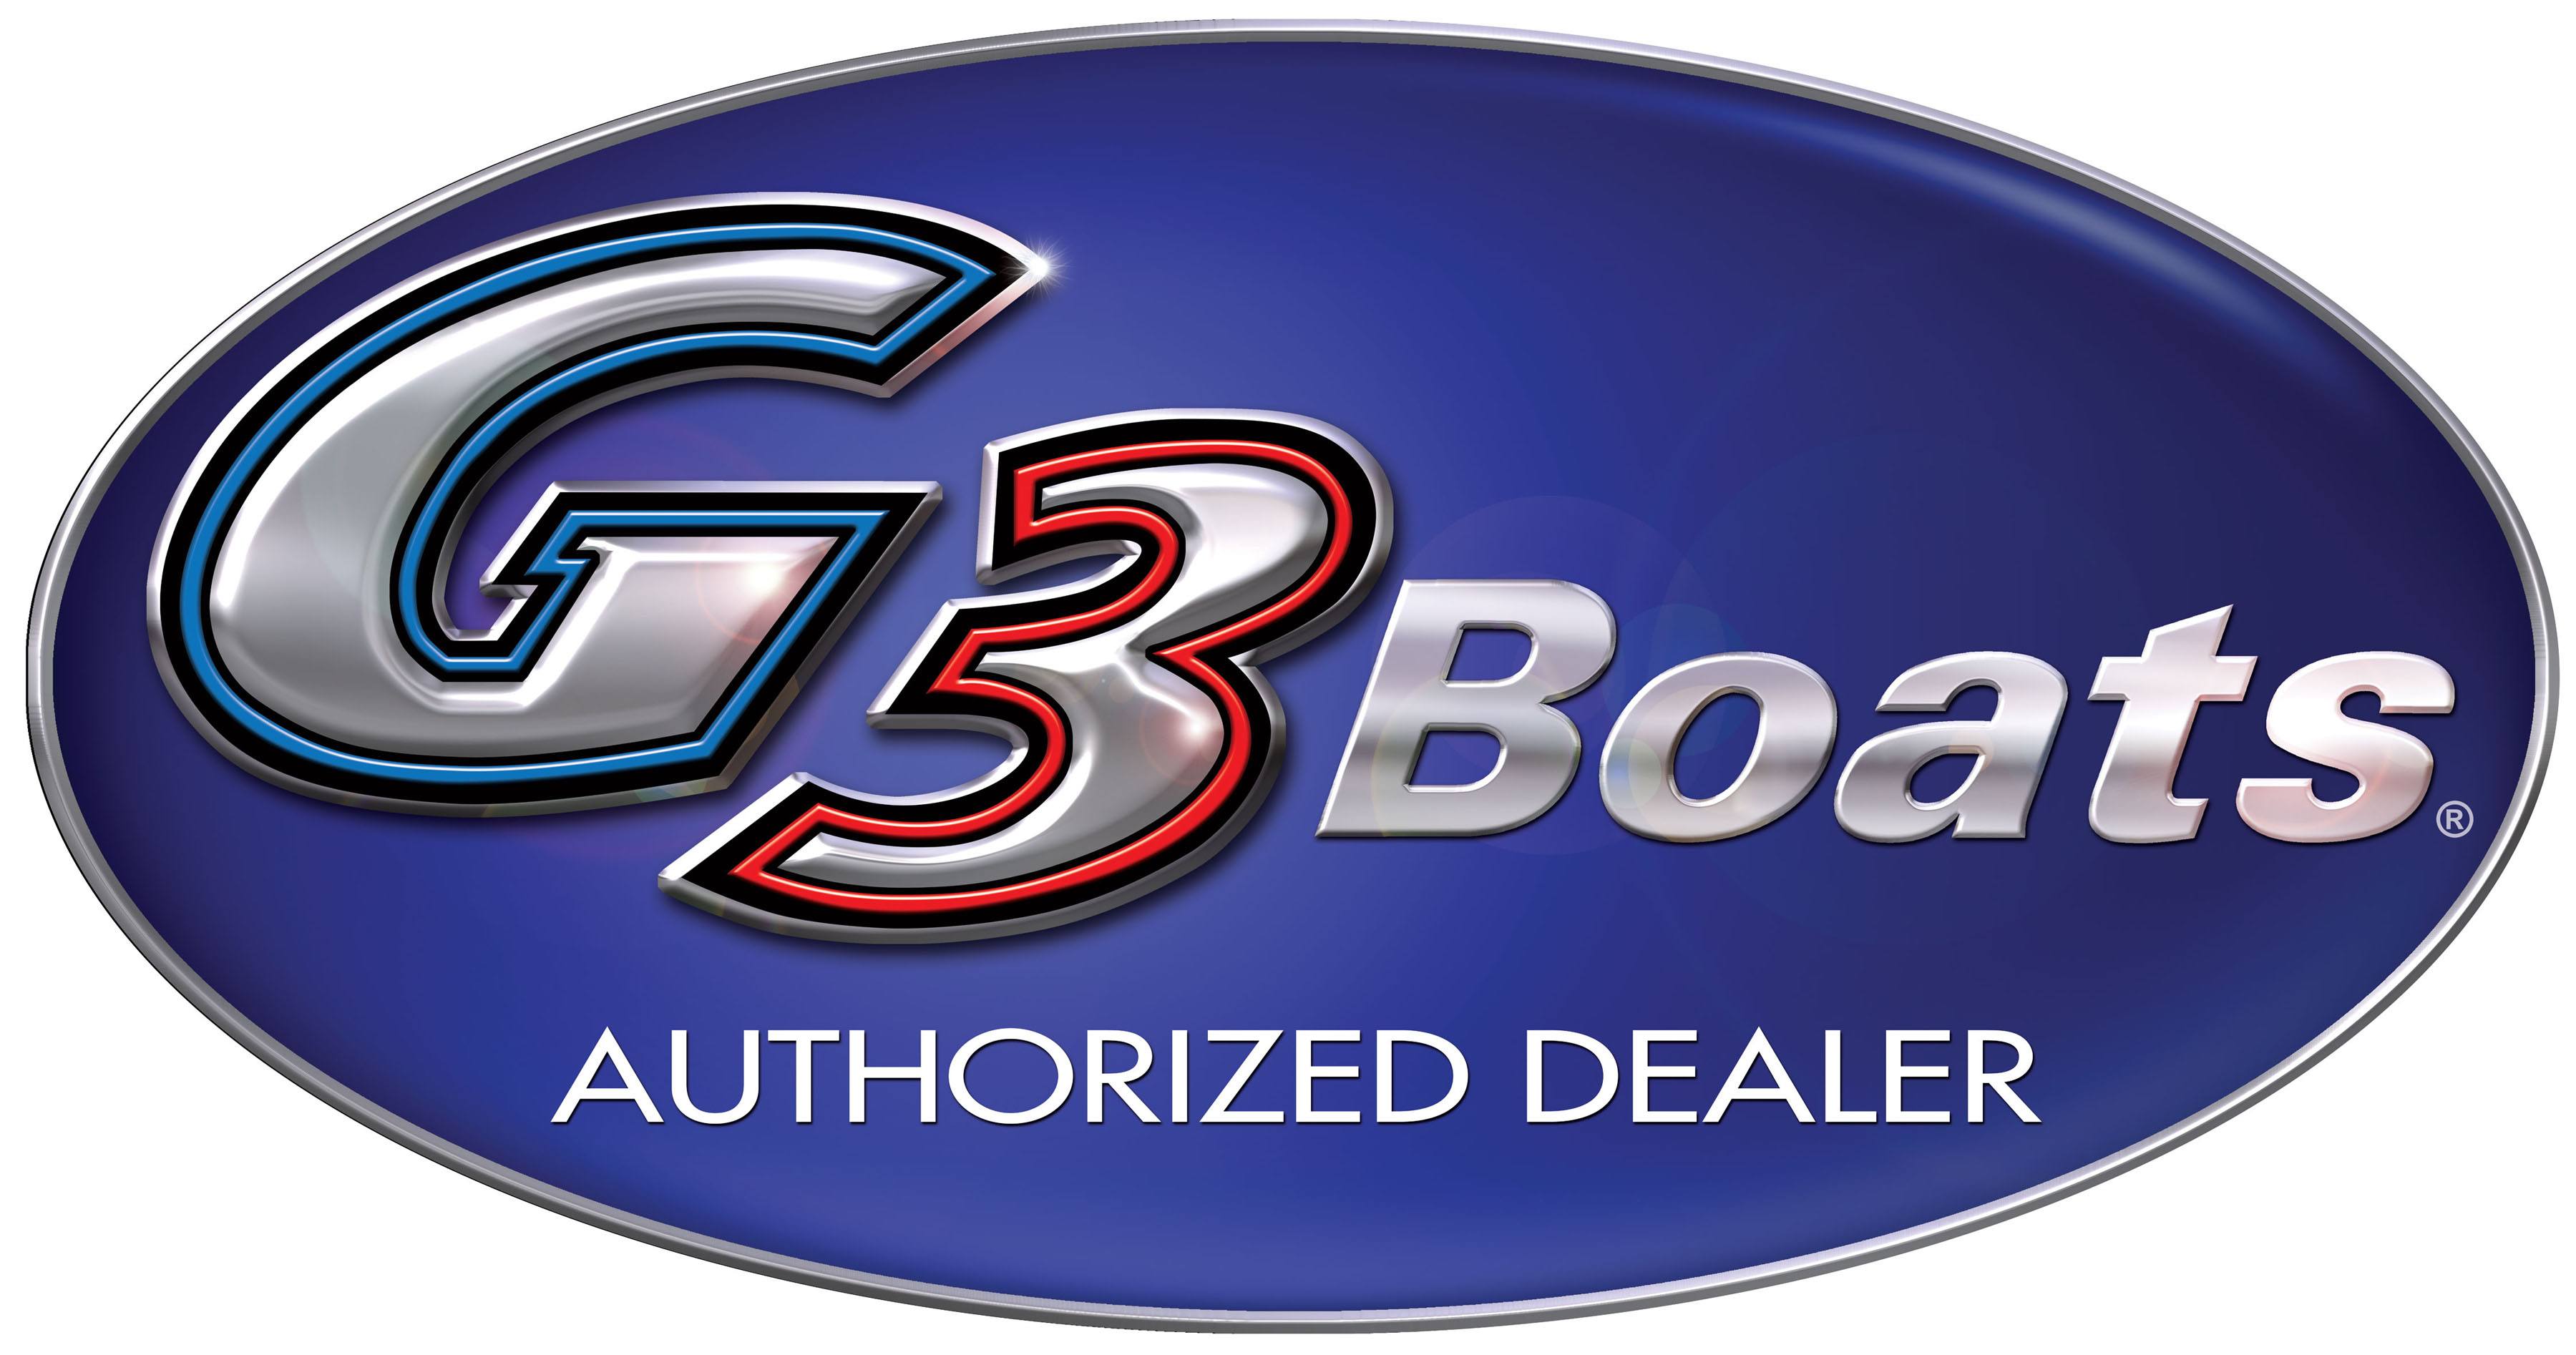 G3 Boats For Sale Pittsburgh